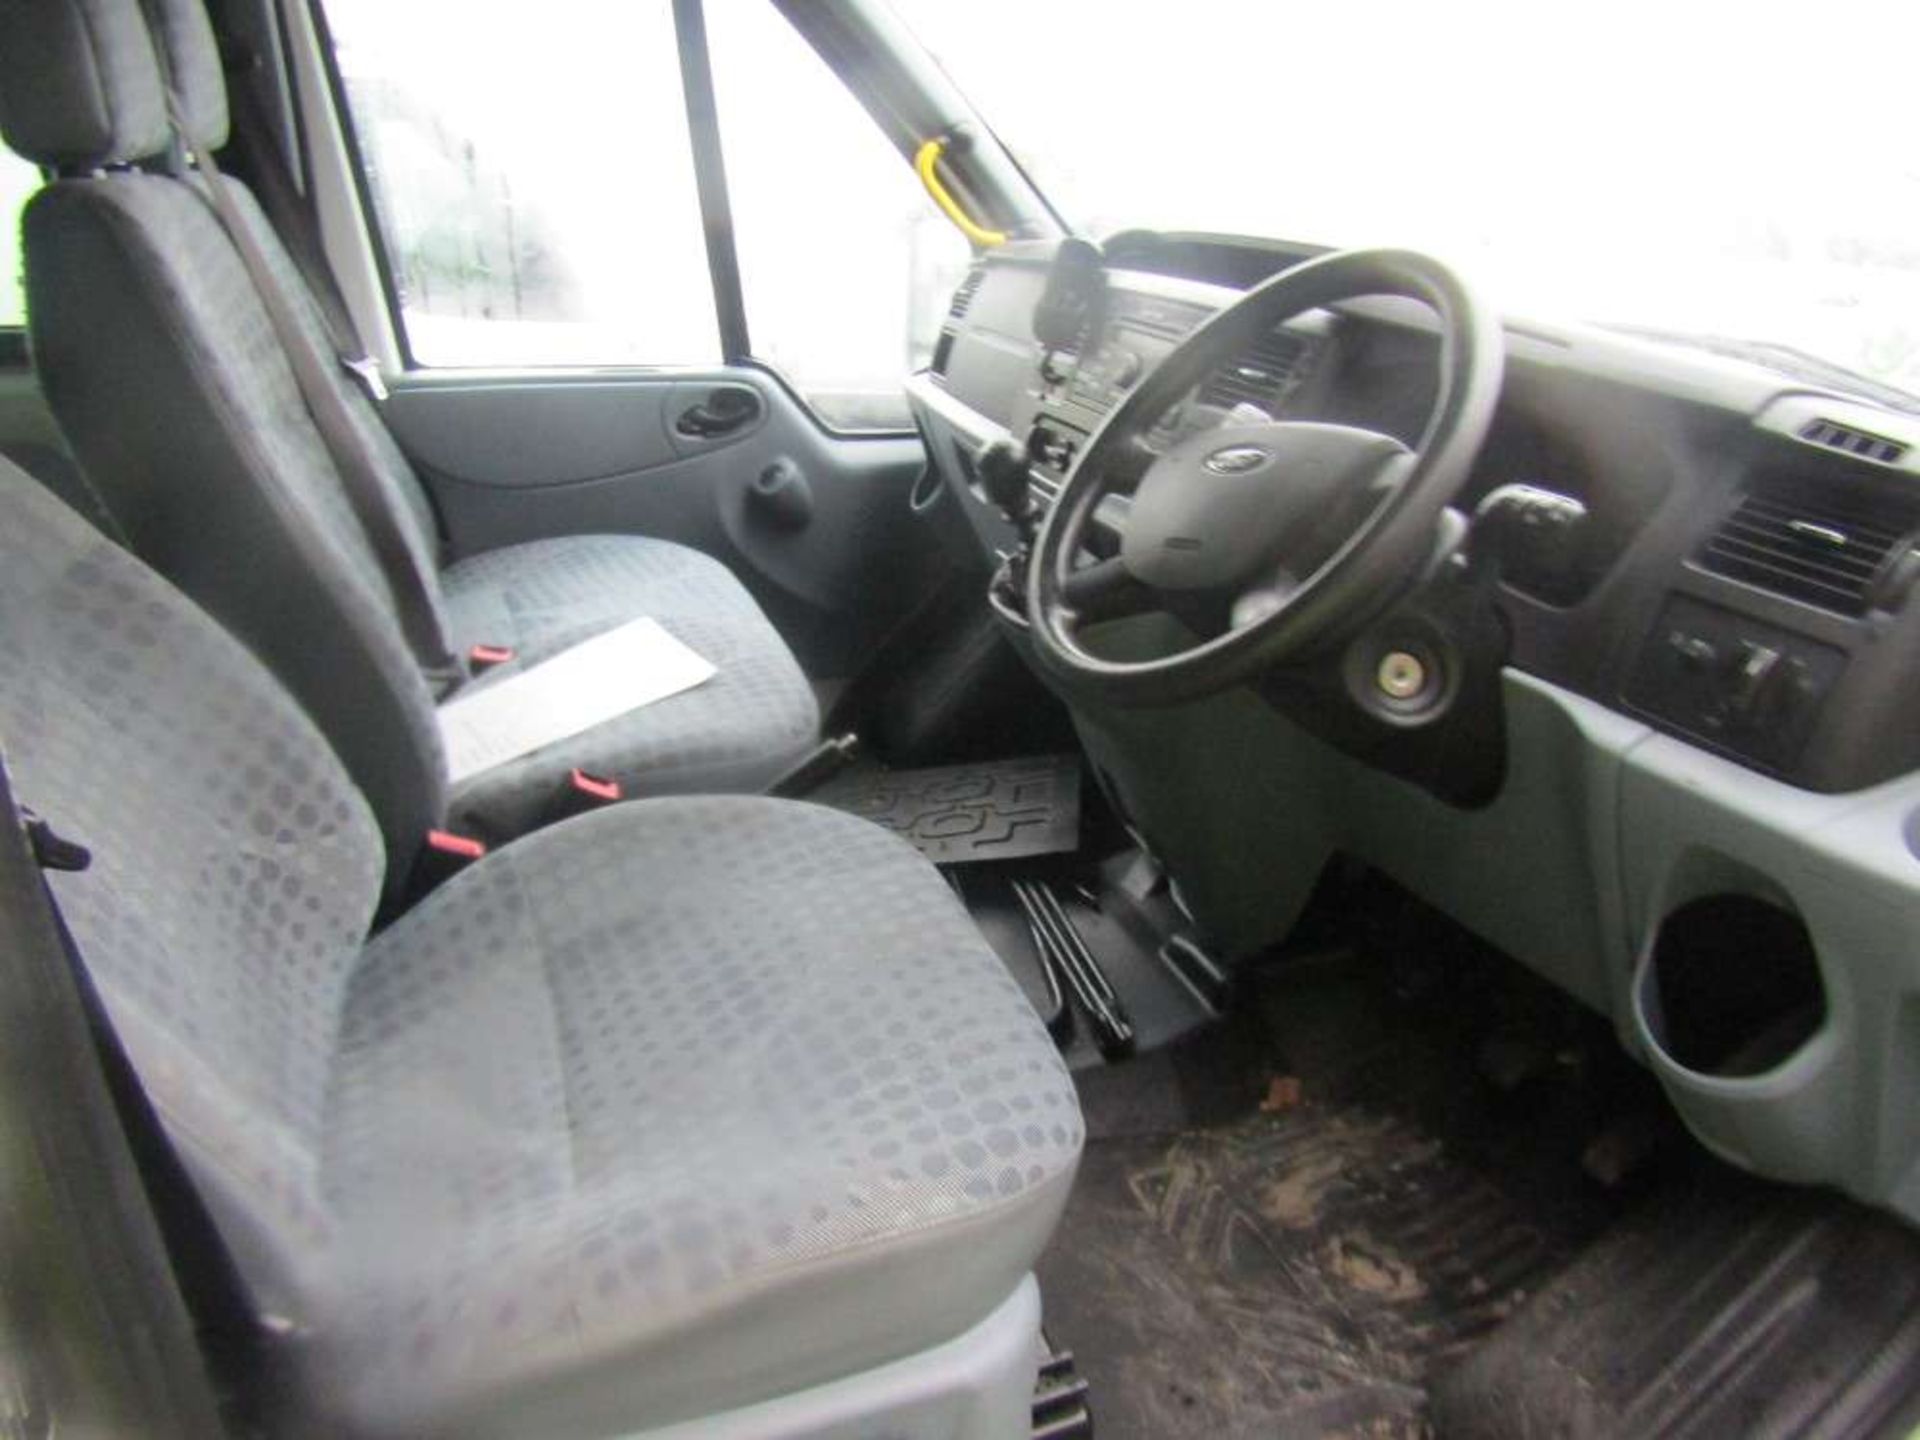 2012 62 reg Ford Transit 135 T430 RWD Minibus (Non Runner) (Direct Lancs Fire) - Image 6 of 7